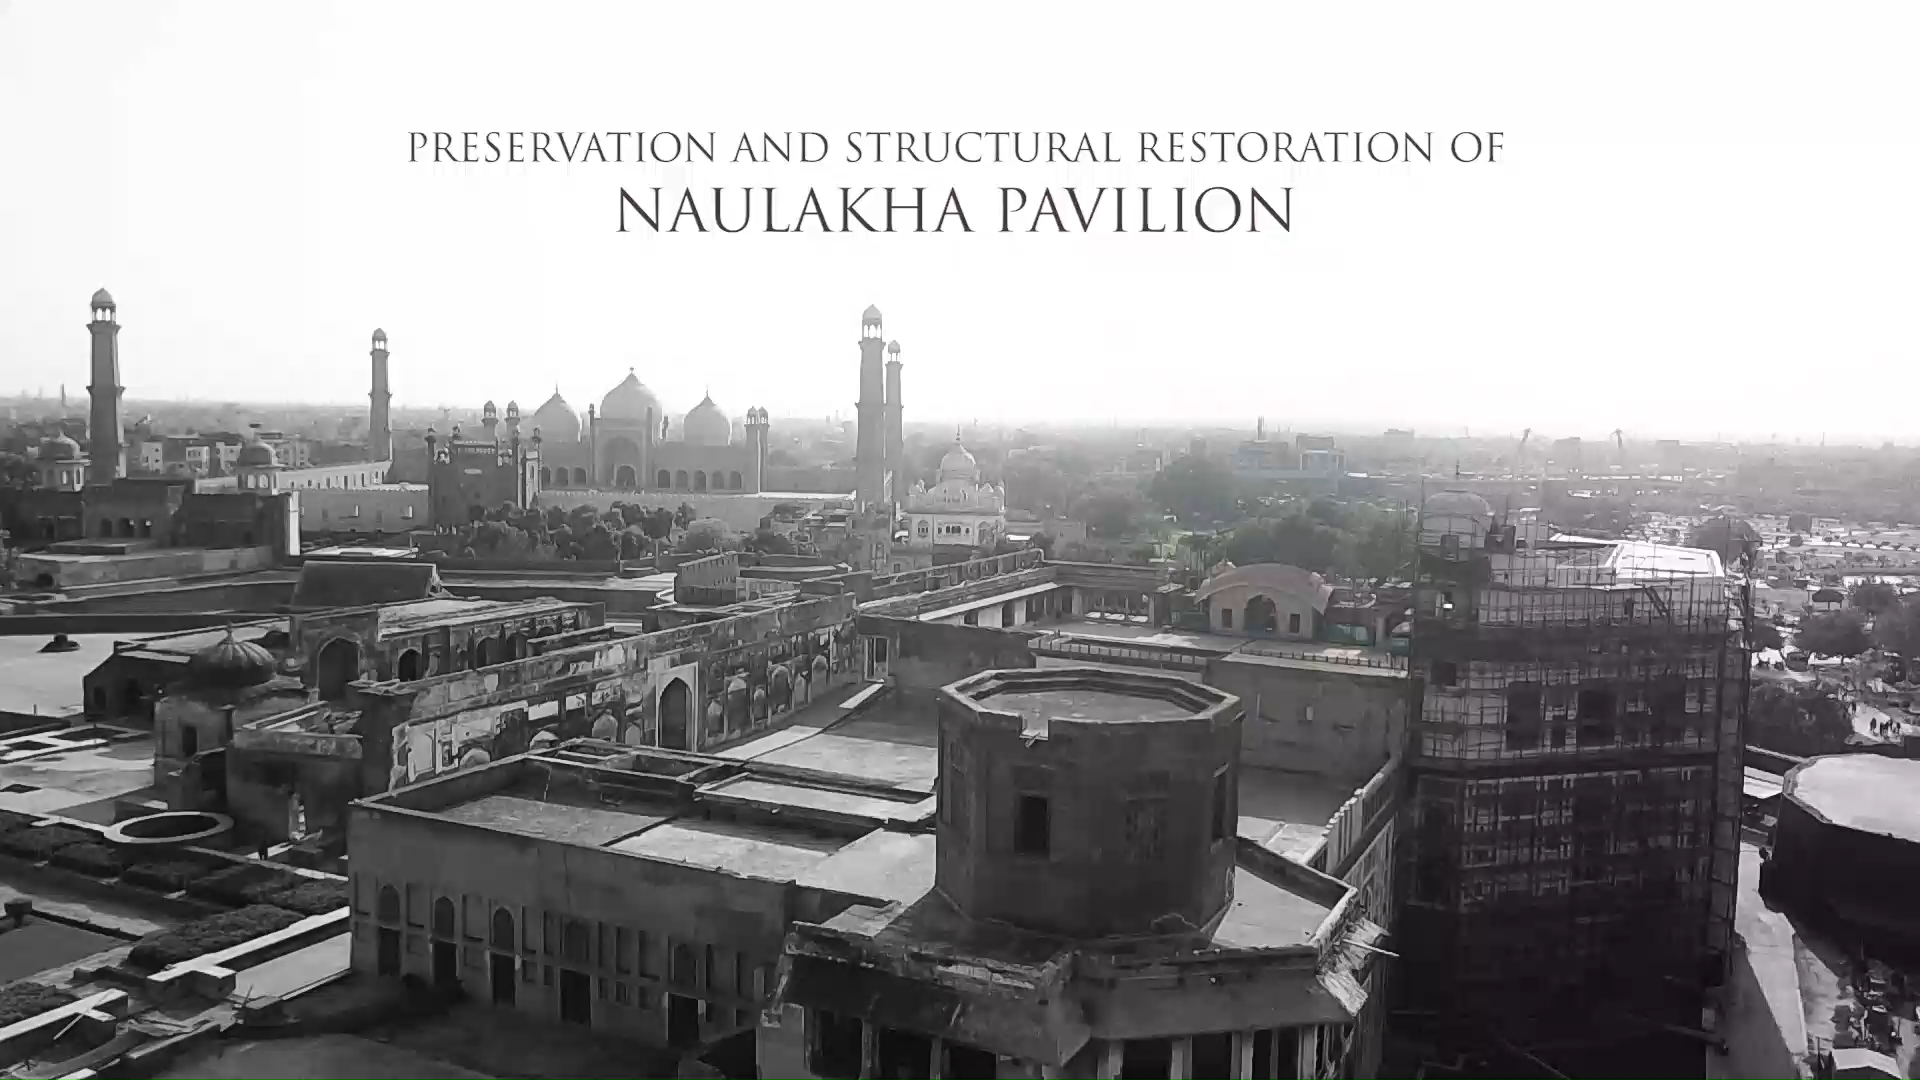 A brief visual report on the restoration of the Naulakha Pavilion at Lahore Fort undertaken by the Aga Khan Trust for Culture